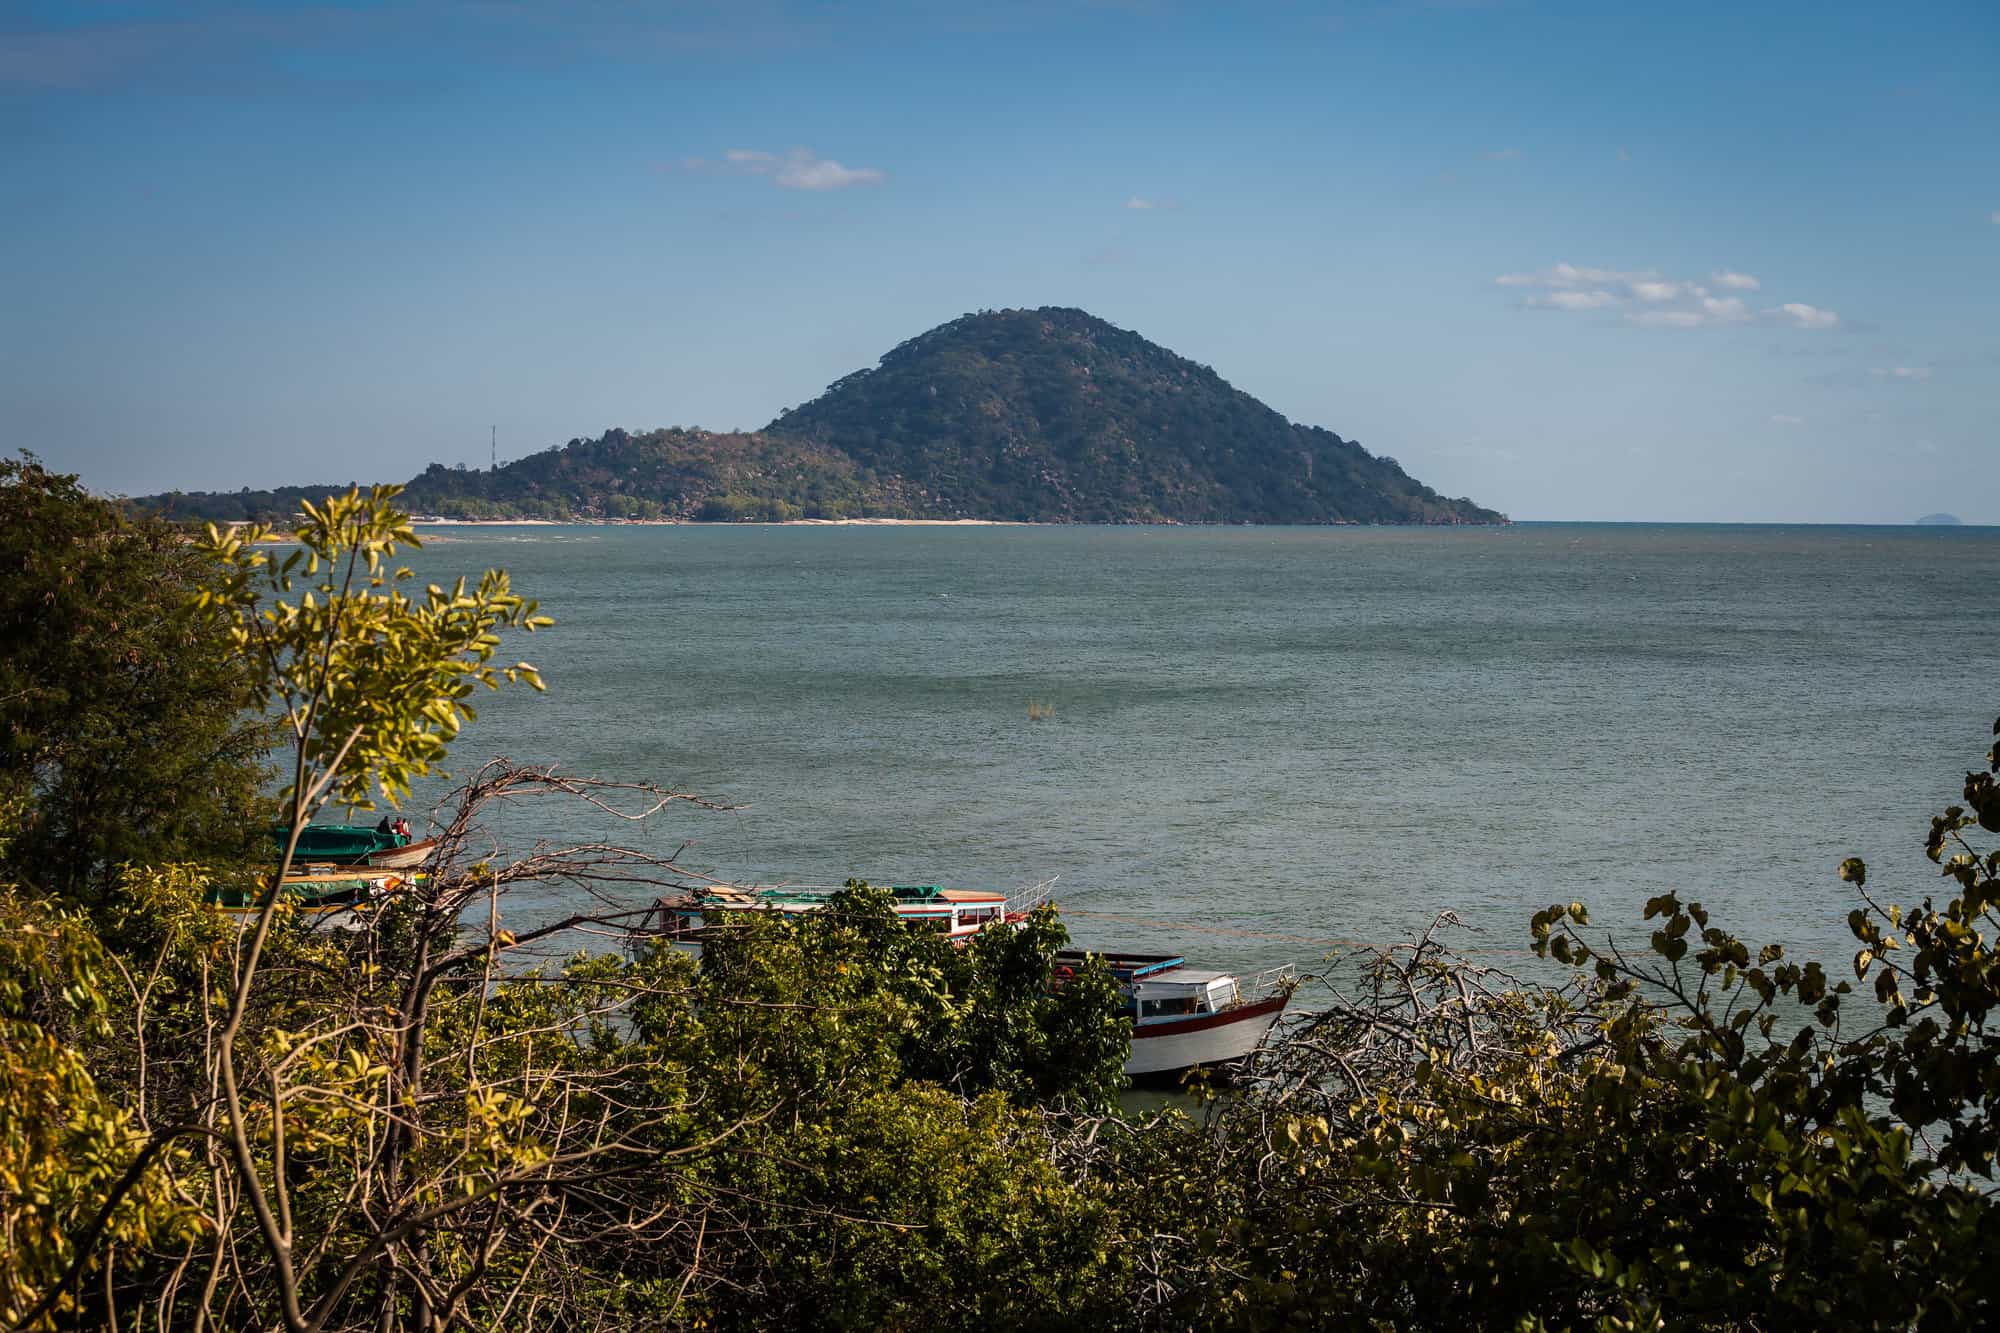 <p>Often overlooked compared to its popular neighbors, Malawi gave me glimpses into untouched Africa. I was endlessly awed by the scale and beauty of Lake Malawi, where I snorkeled with colorful cichlids and watched the sun sink into the vast waters. </p> <p>Lush mountains, thundering waterfalls, and boulder-strewn landscapes at spots like Mulanje Massif and Nyika National Park exemplified the country’s untamed natural splendor.</p>